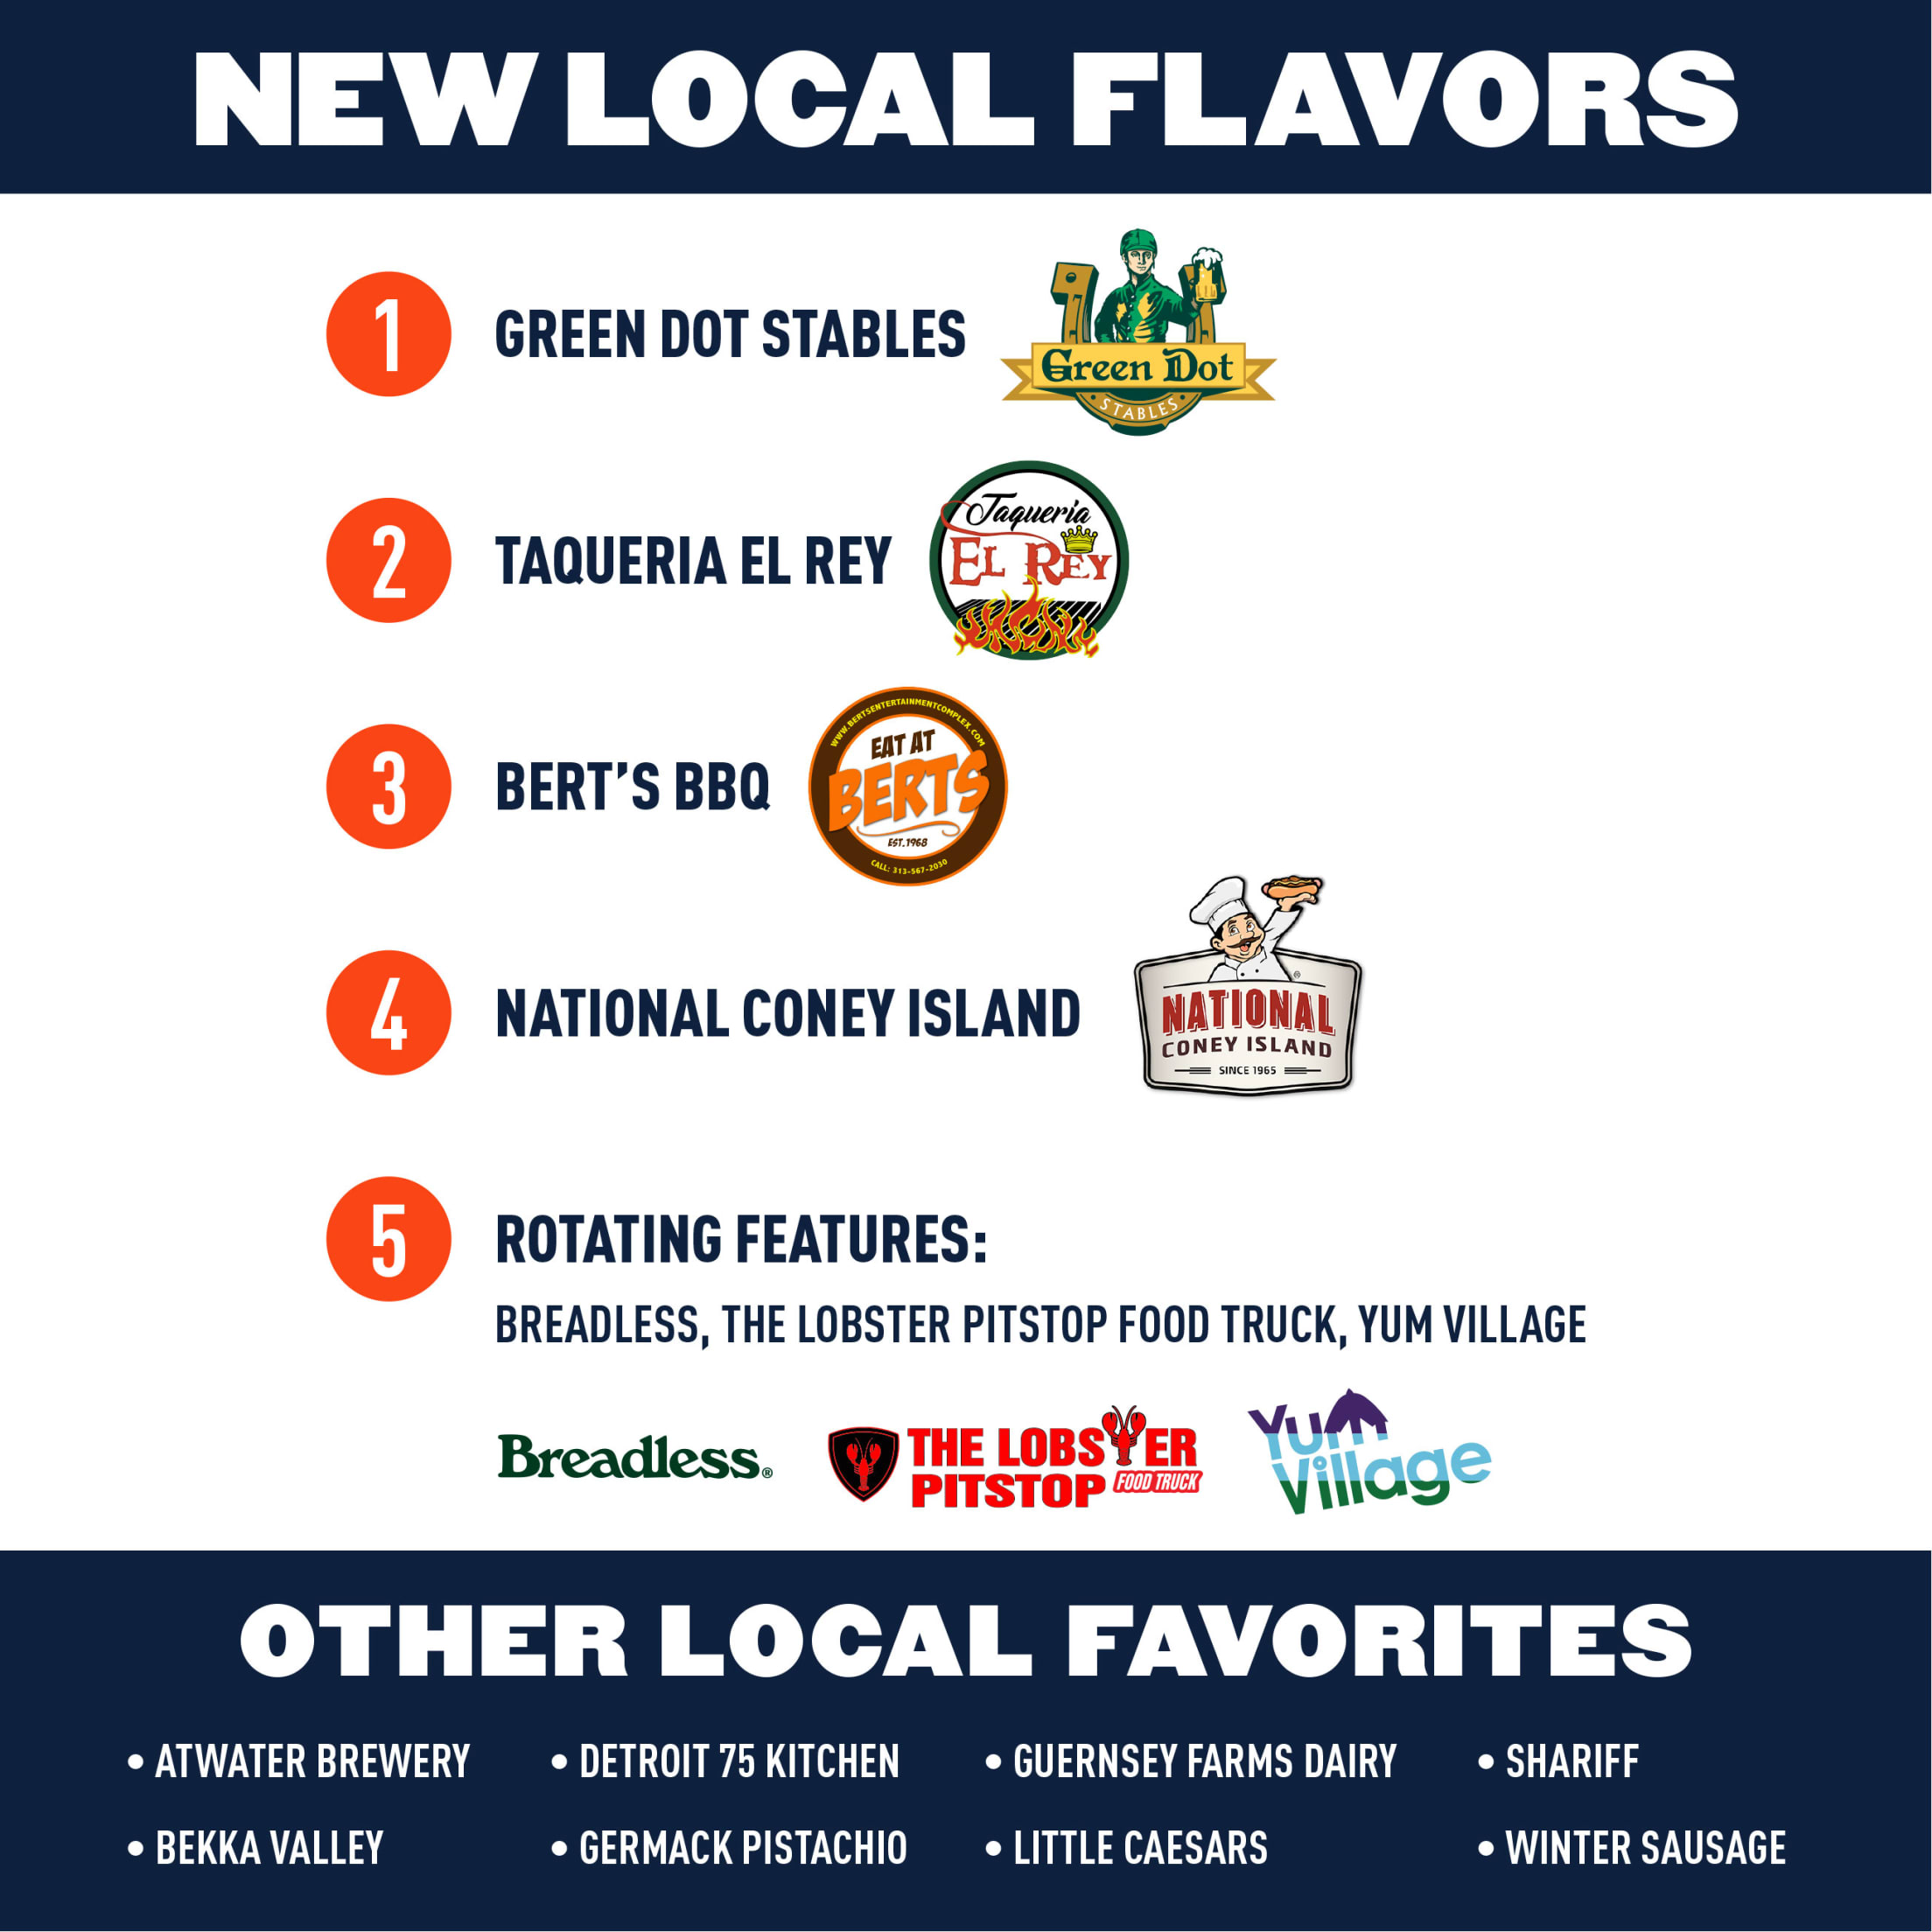 Local flavors join ballpark favorites at Comerica Park this year